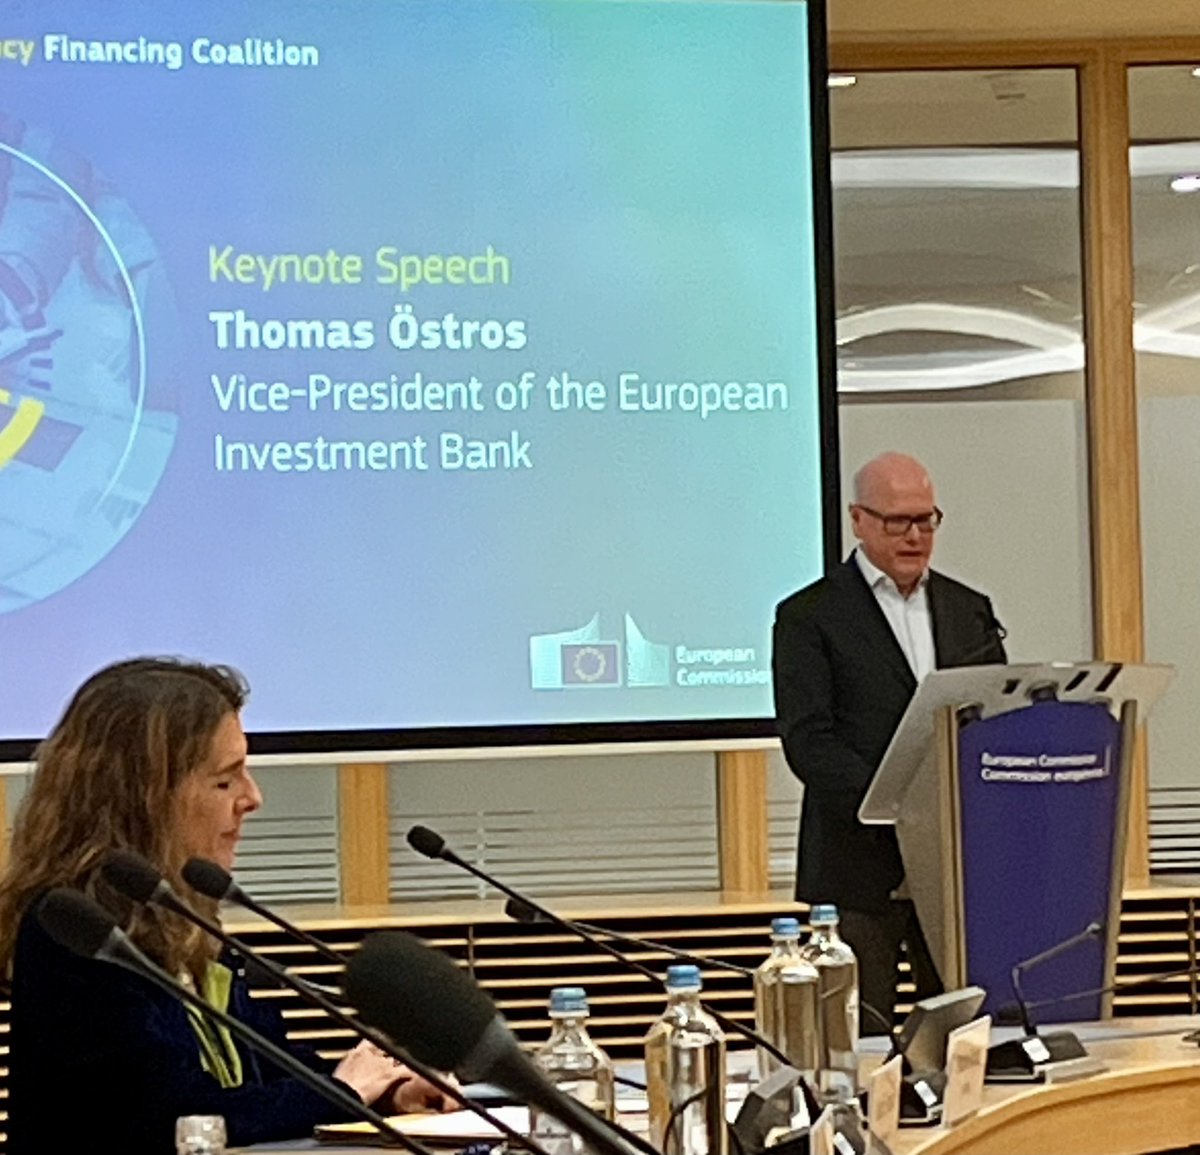 #EEEFinCoalition hears @OstrosThomas VP of @EIB highlight the central role of #energyefficiency in the context of “the EU’s climate bank” - and how they improve #competitiveness and make the #energytransition fairer for EU citizens